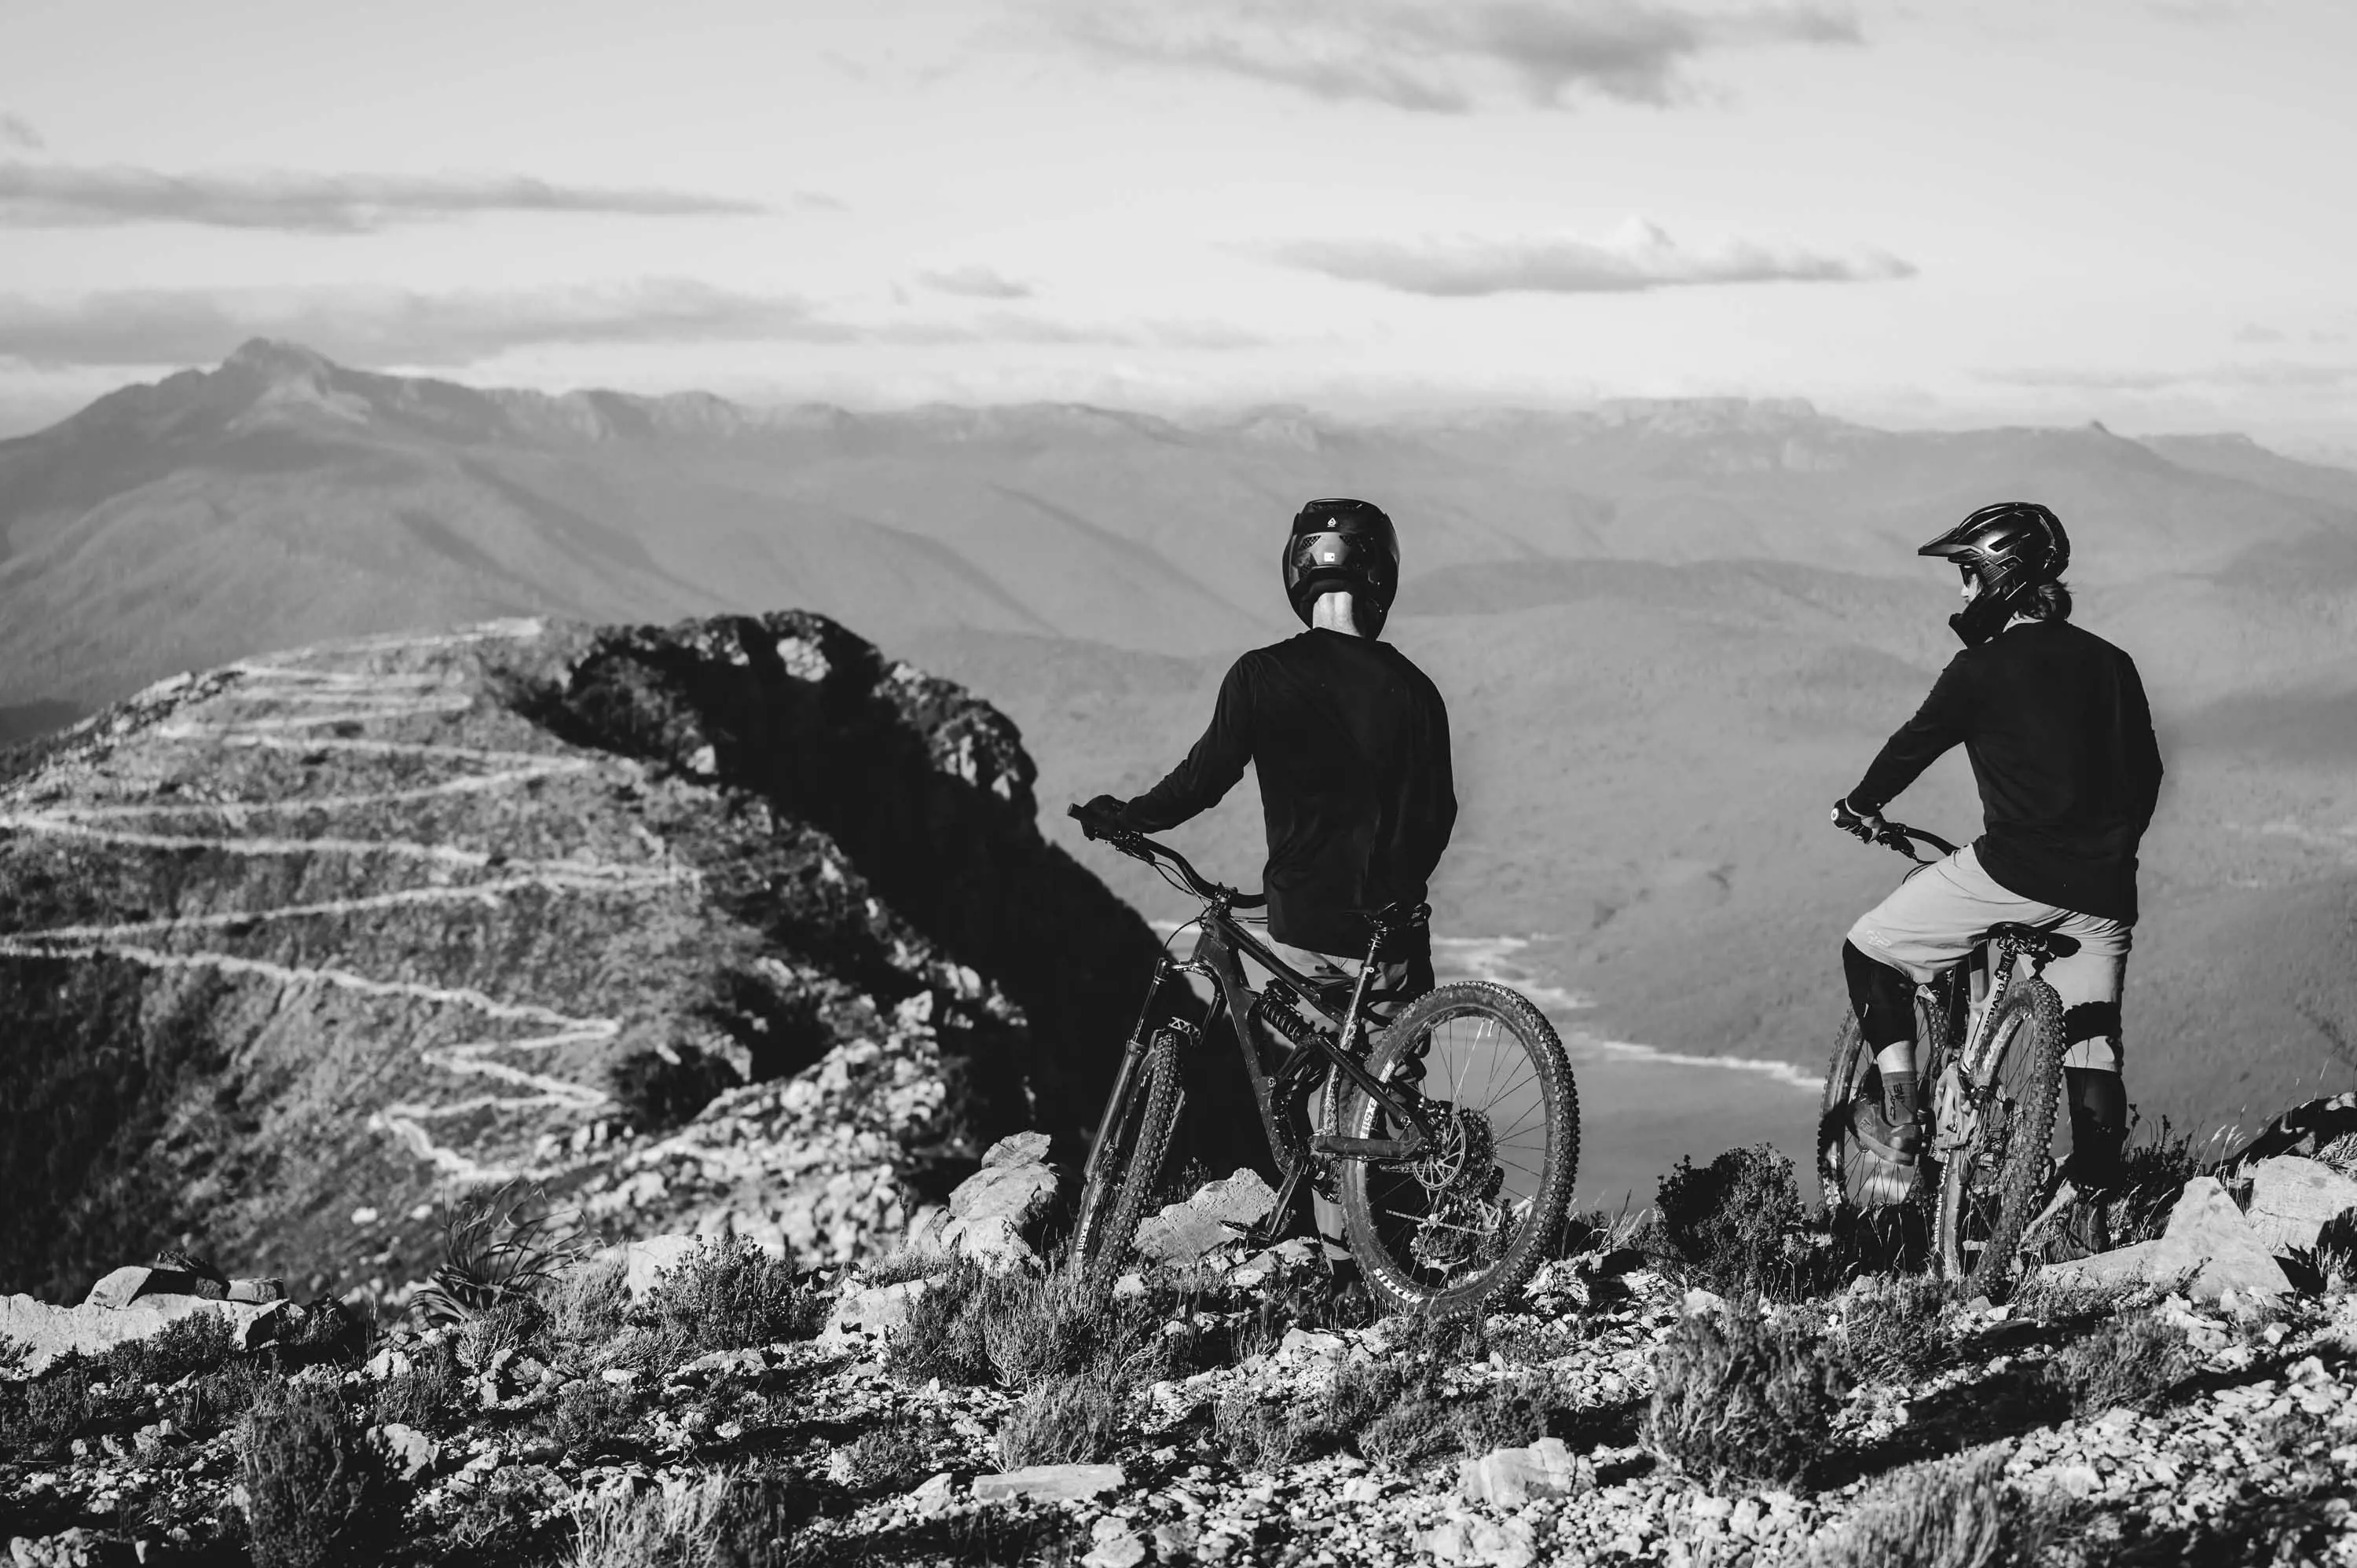 Two mountain bike riders wearing helmets and protective equipment stop to look at the gravel track zig-zagging down a mountain in the distance.